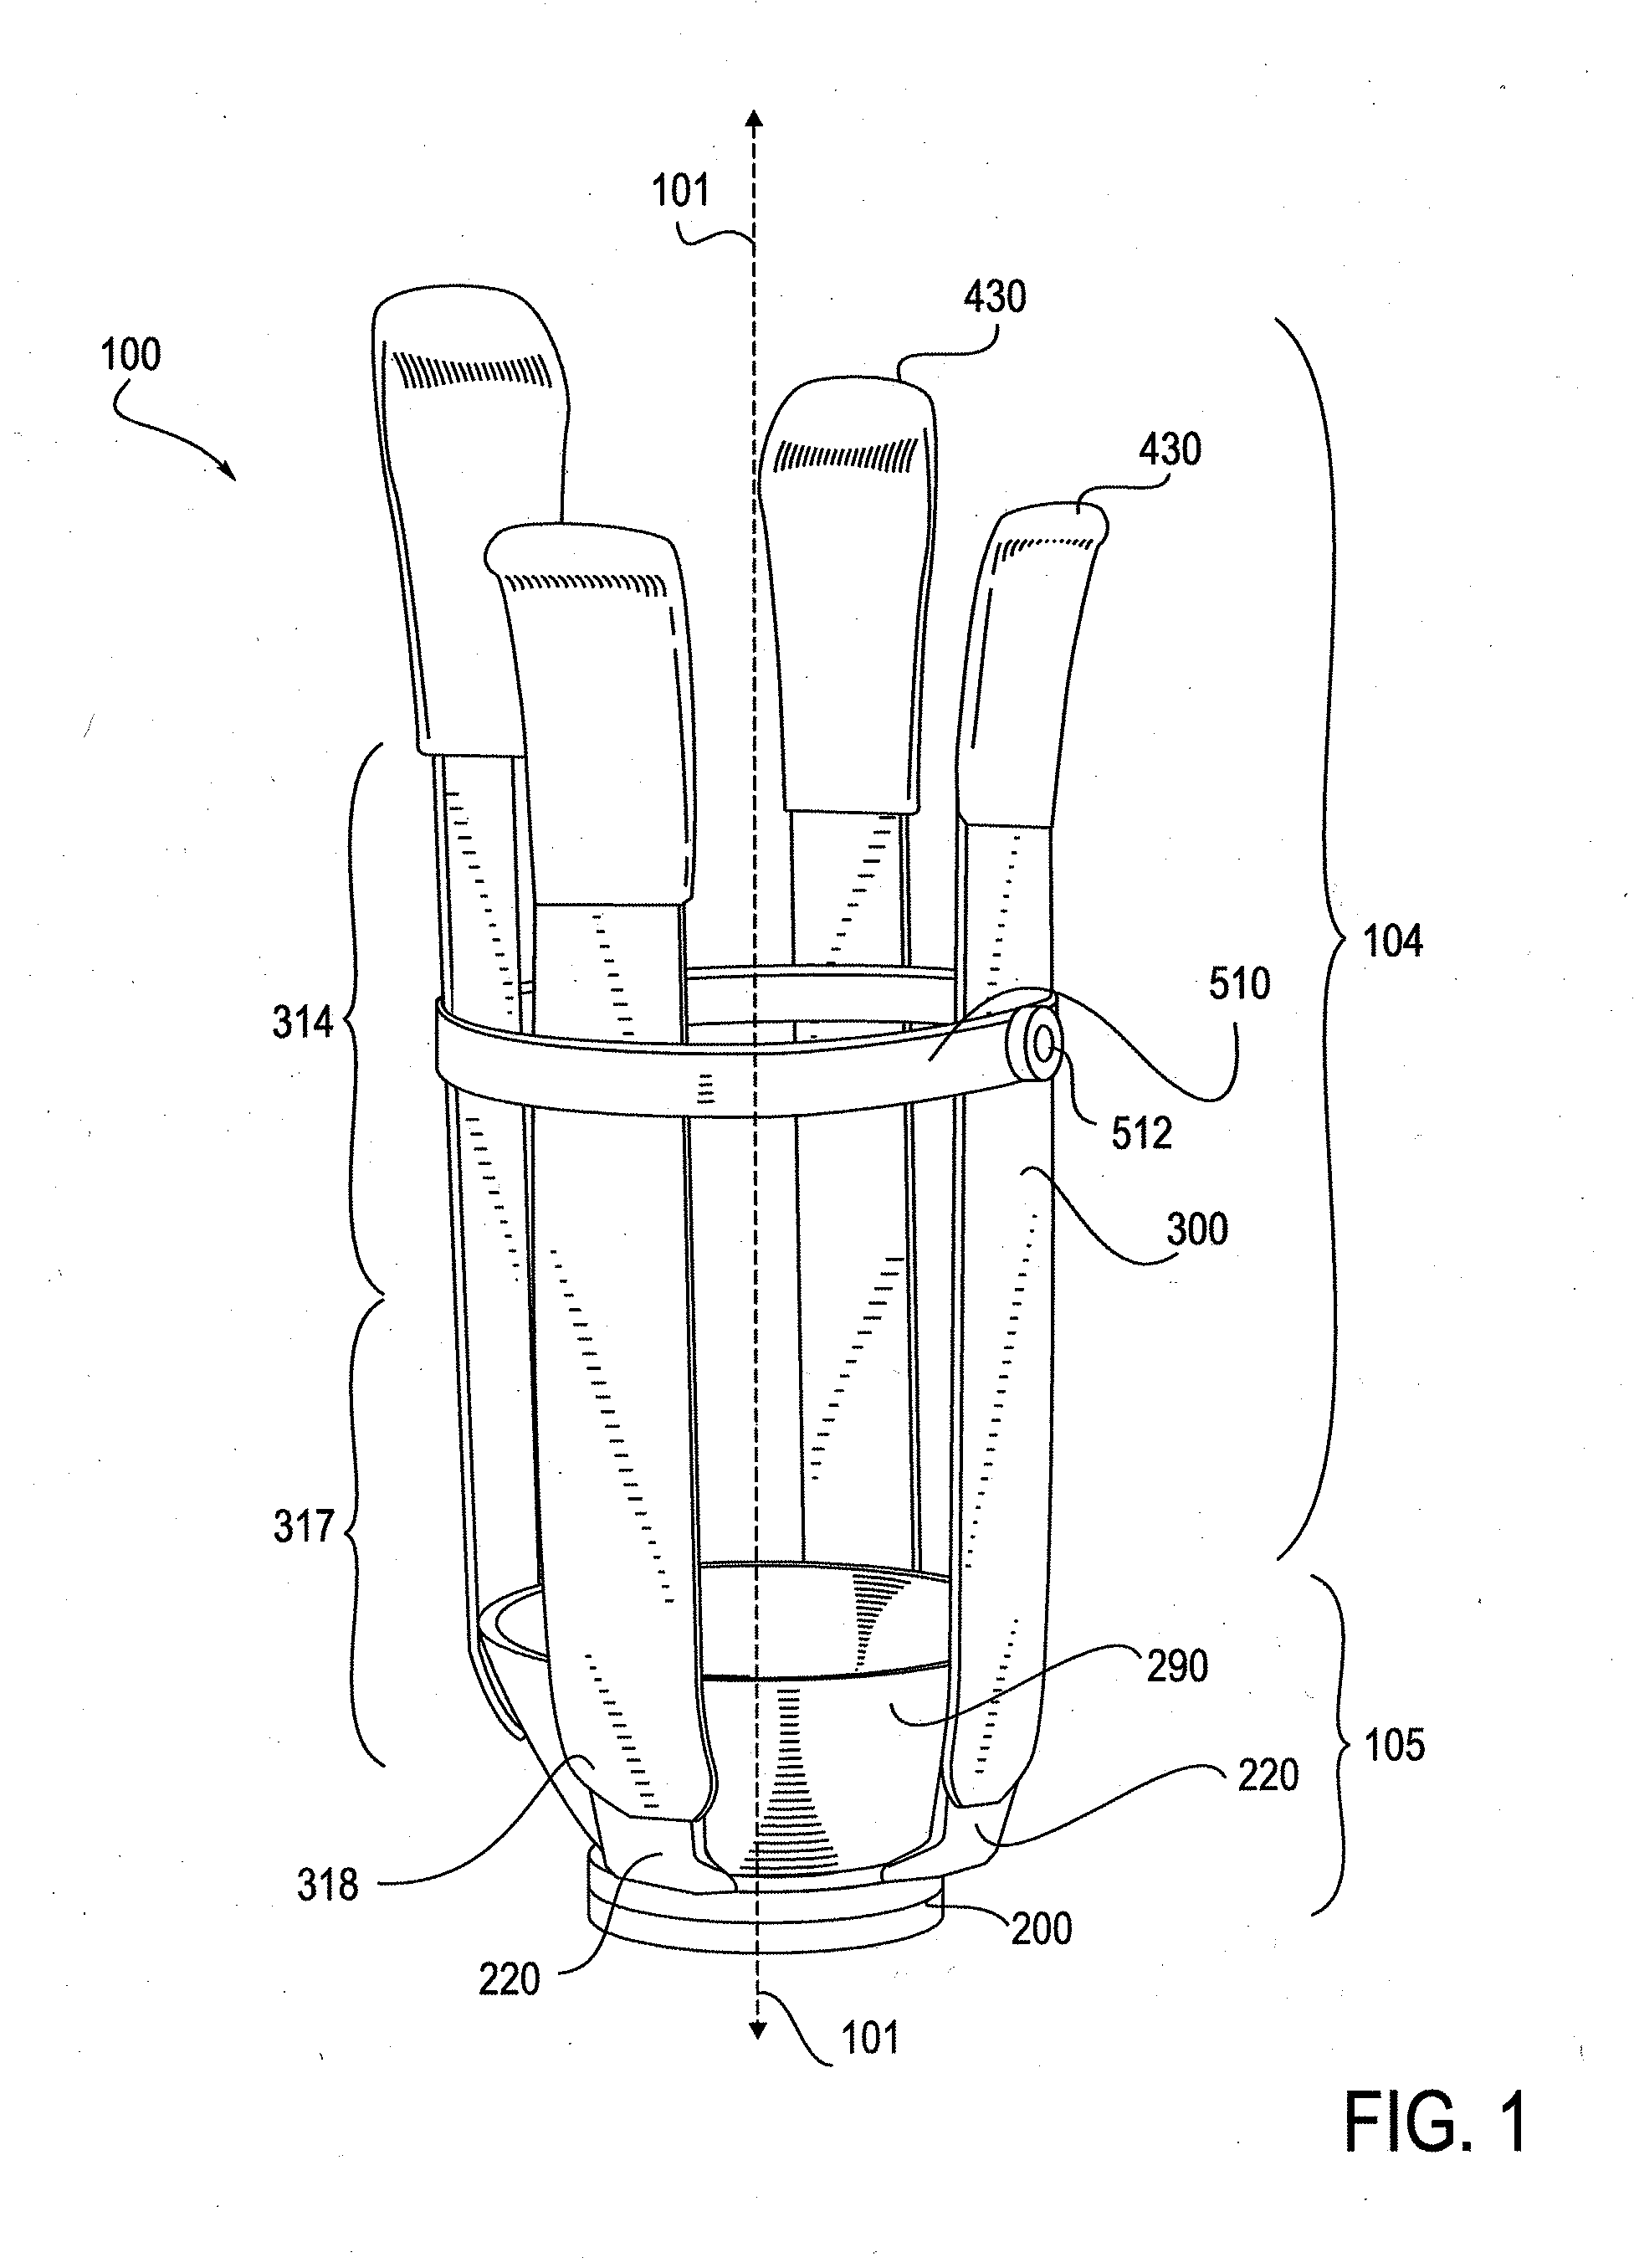 Modular prosthetic sockets and methods for making and using same